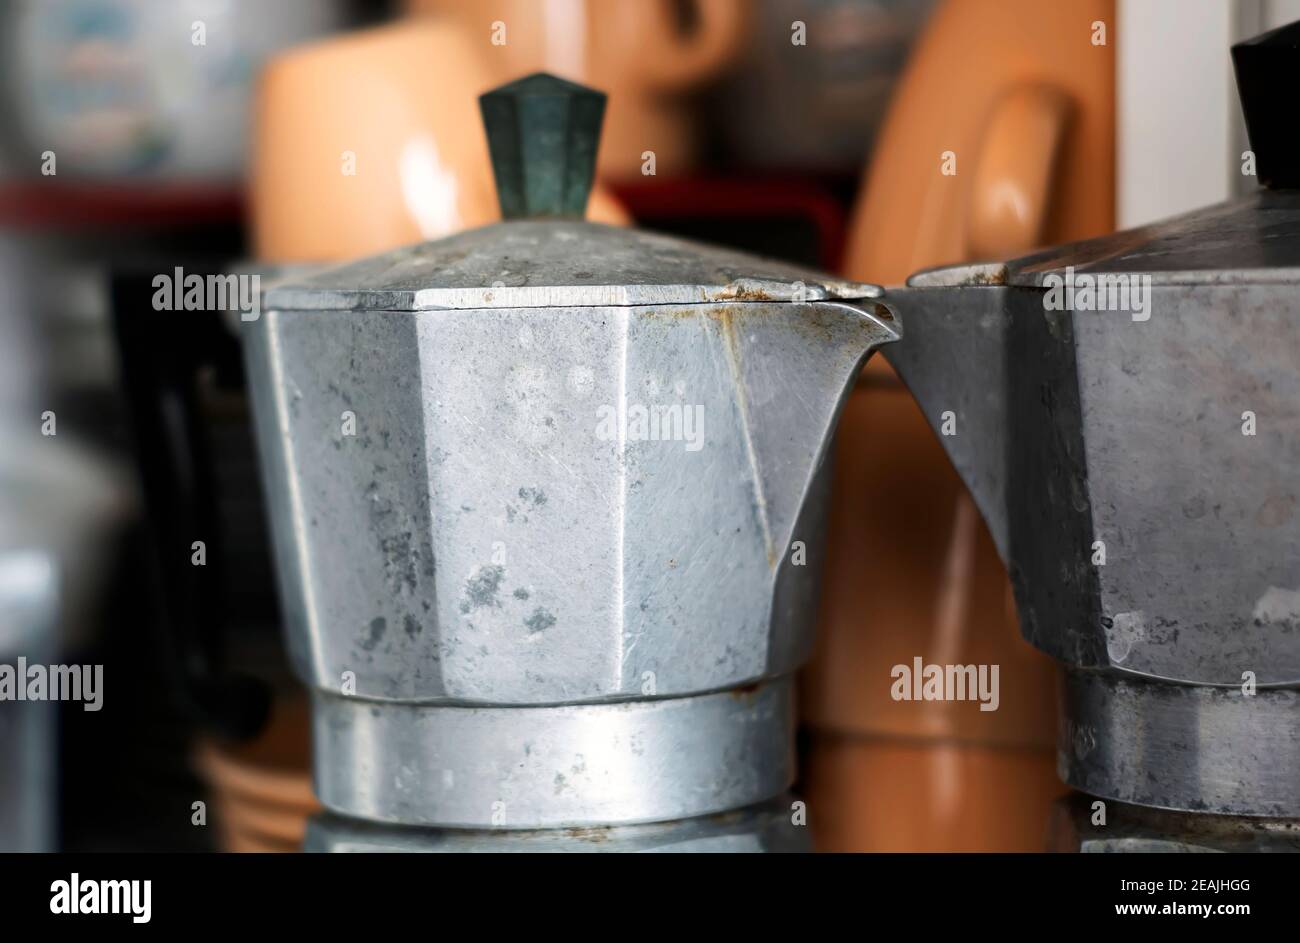 Caffeine Design Concept - Old Kettle For Coffee, Coffee Cups On A Wooden  Background. Stock Photo, Picture and Royalty Free Image. Image 94777075.